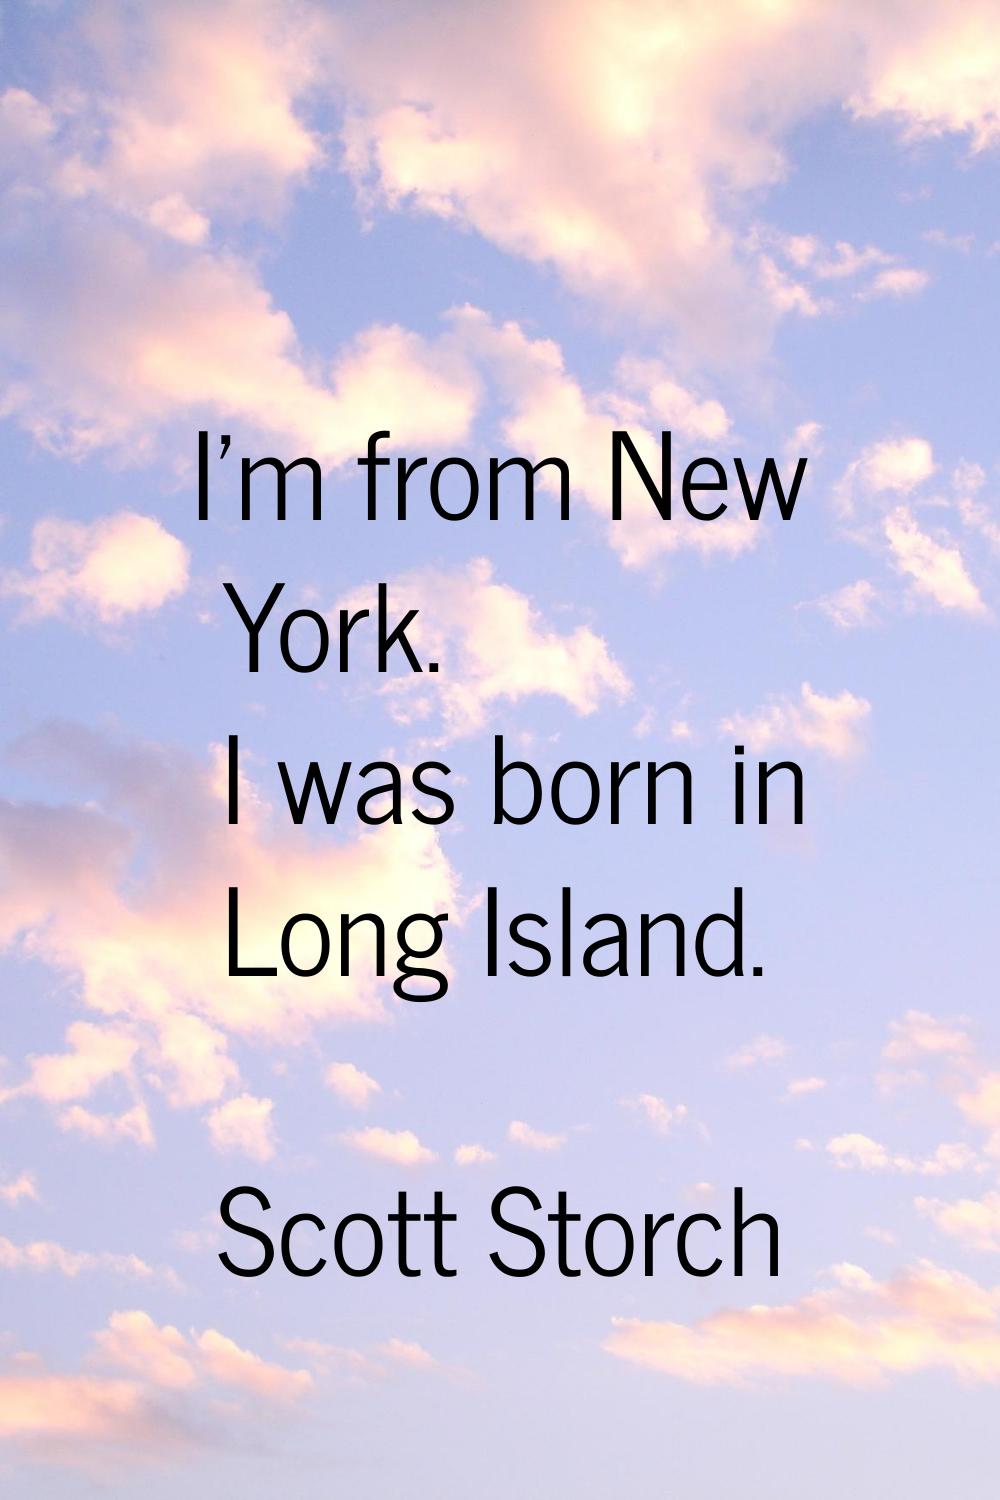 I'm from New York. I was born in Long Island.